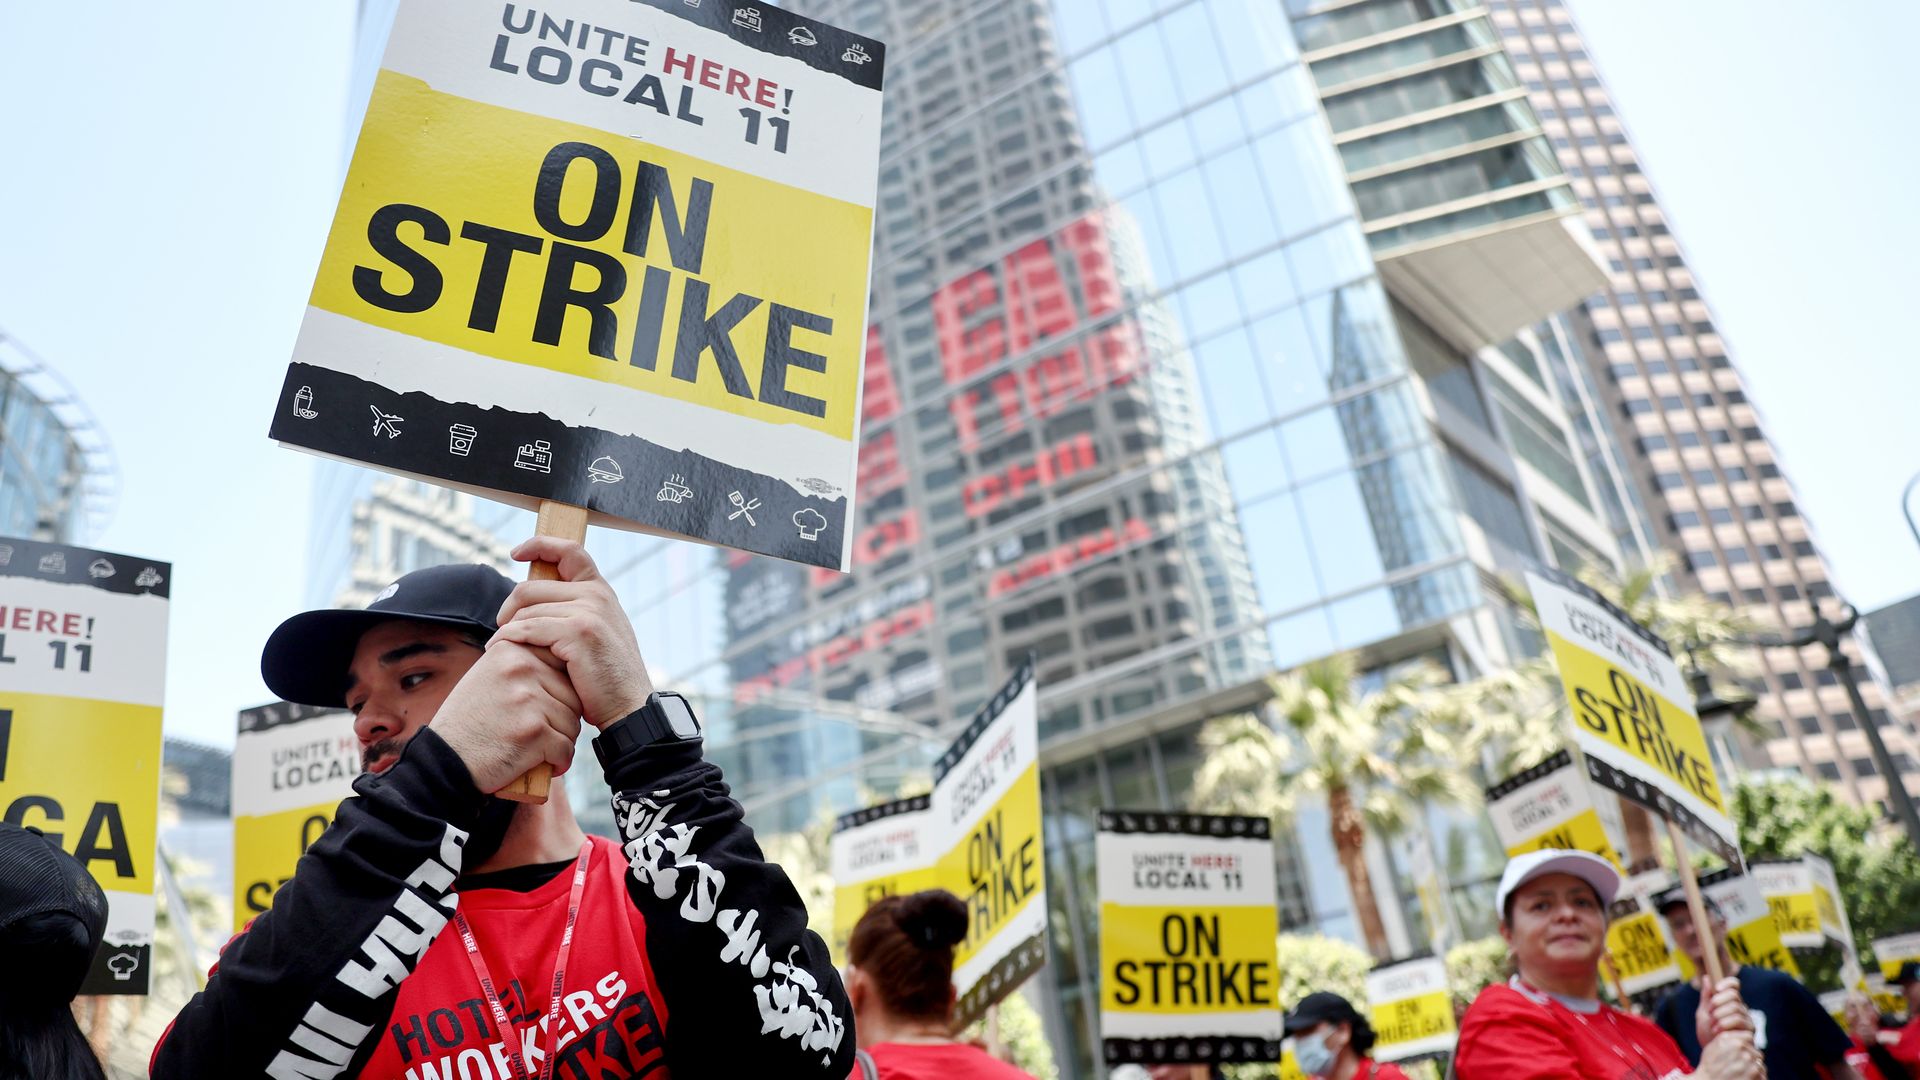 Hotel workers with Unite Here Local 11 picket outside the InterContinental hotel on the first day of a strike by union members at many major hotels in Southern California on July 2, 2023 in Los Angeles, California. 